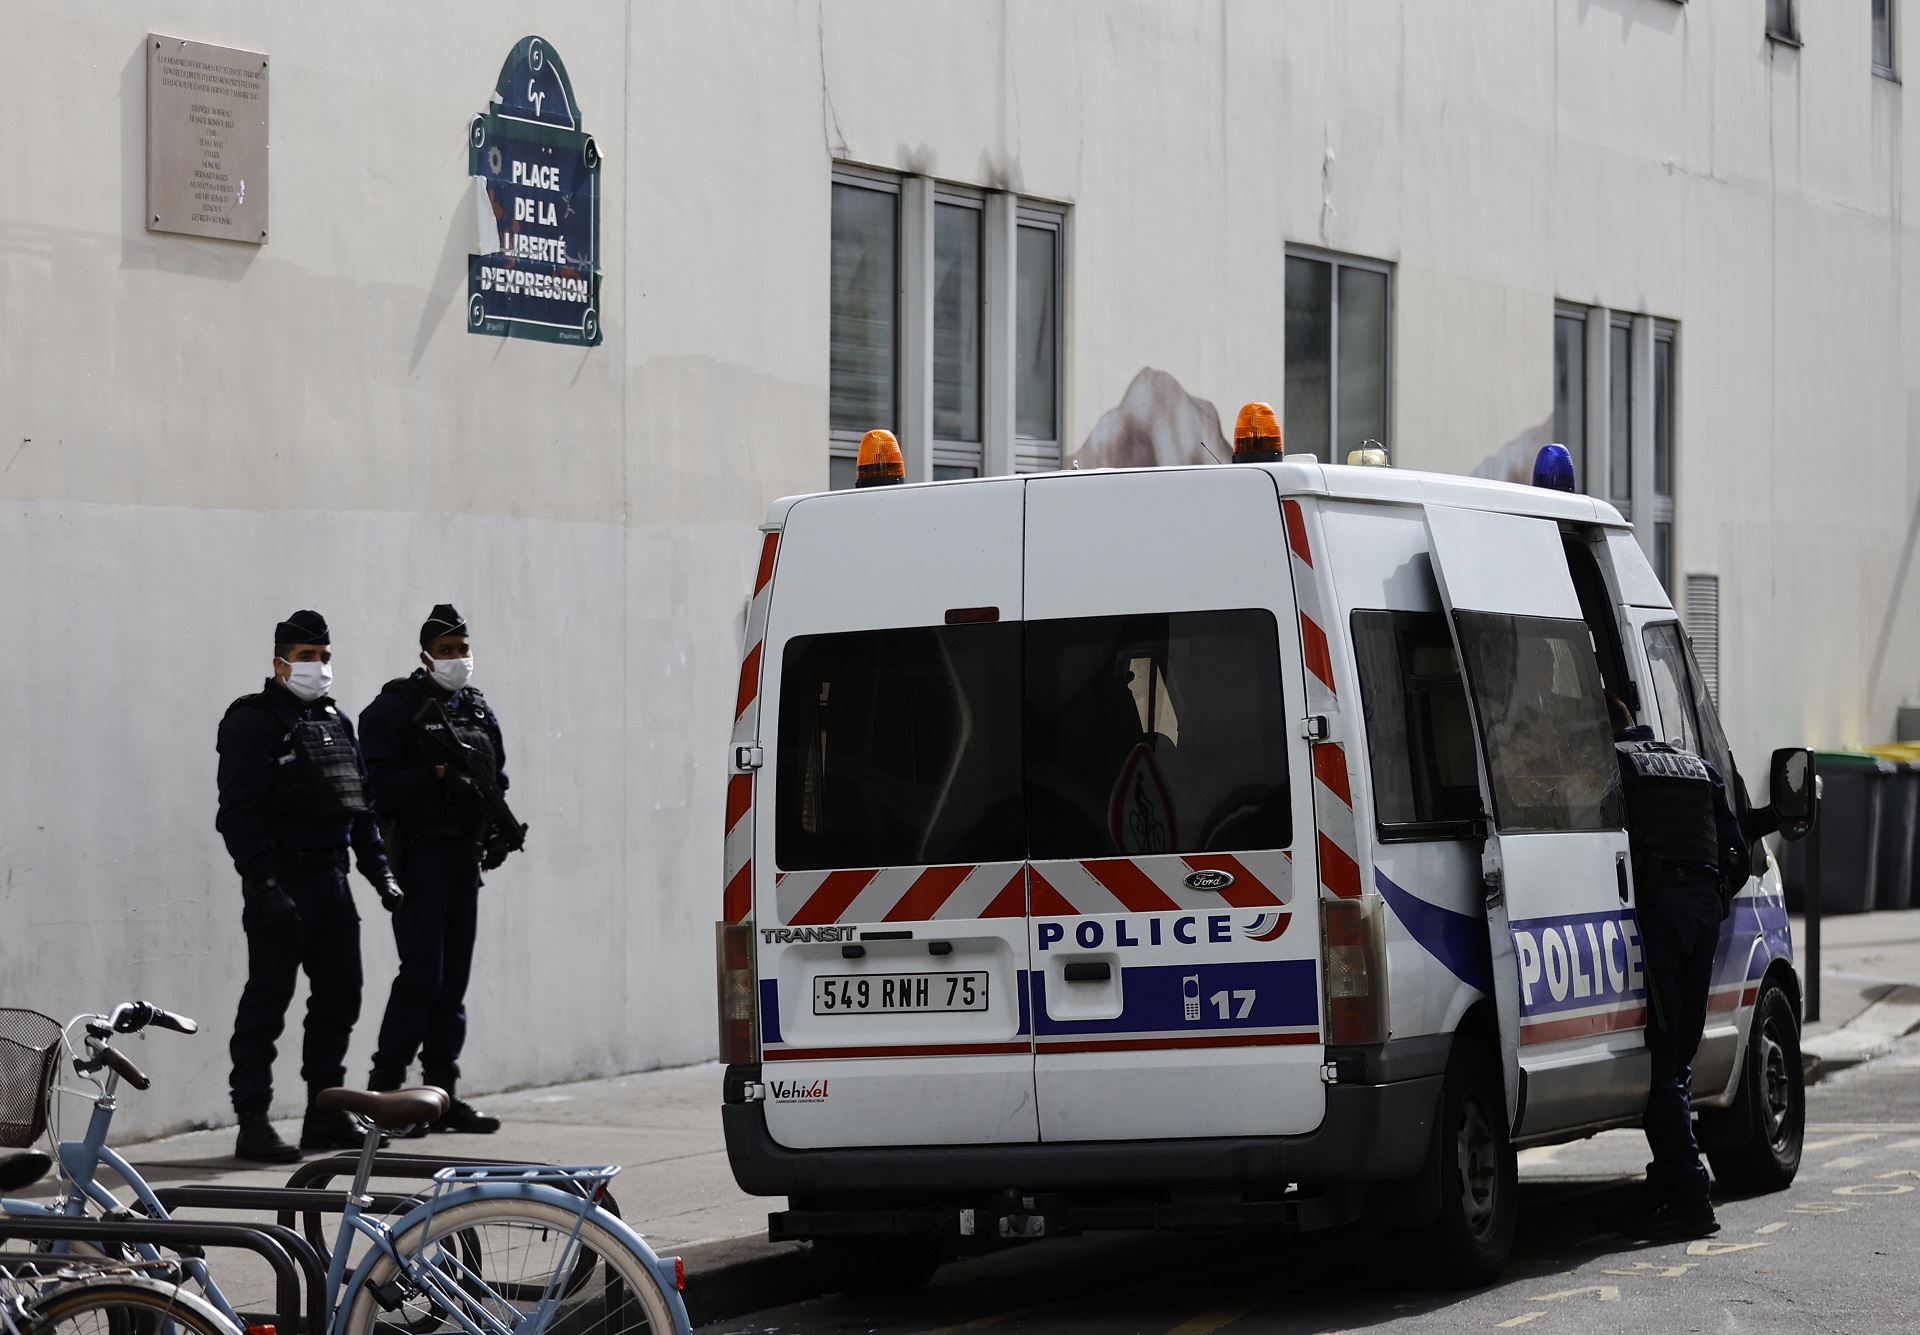 epa08698654 French police officers stand guard in front of the former Charlie Hebdo offices, on Rue Nicolas Appert in Paris, France, 26 September 2020, the day after a knife attack during which two people were wounded. A suspect was later apprehended nearby on Place de la Bastille, and has since revealed he intended to exact revenge for Charlie Hebdo's caricatures.  EPA/IAN LANGSDON